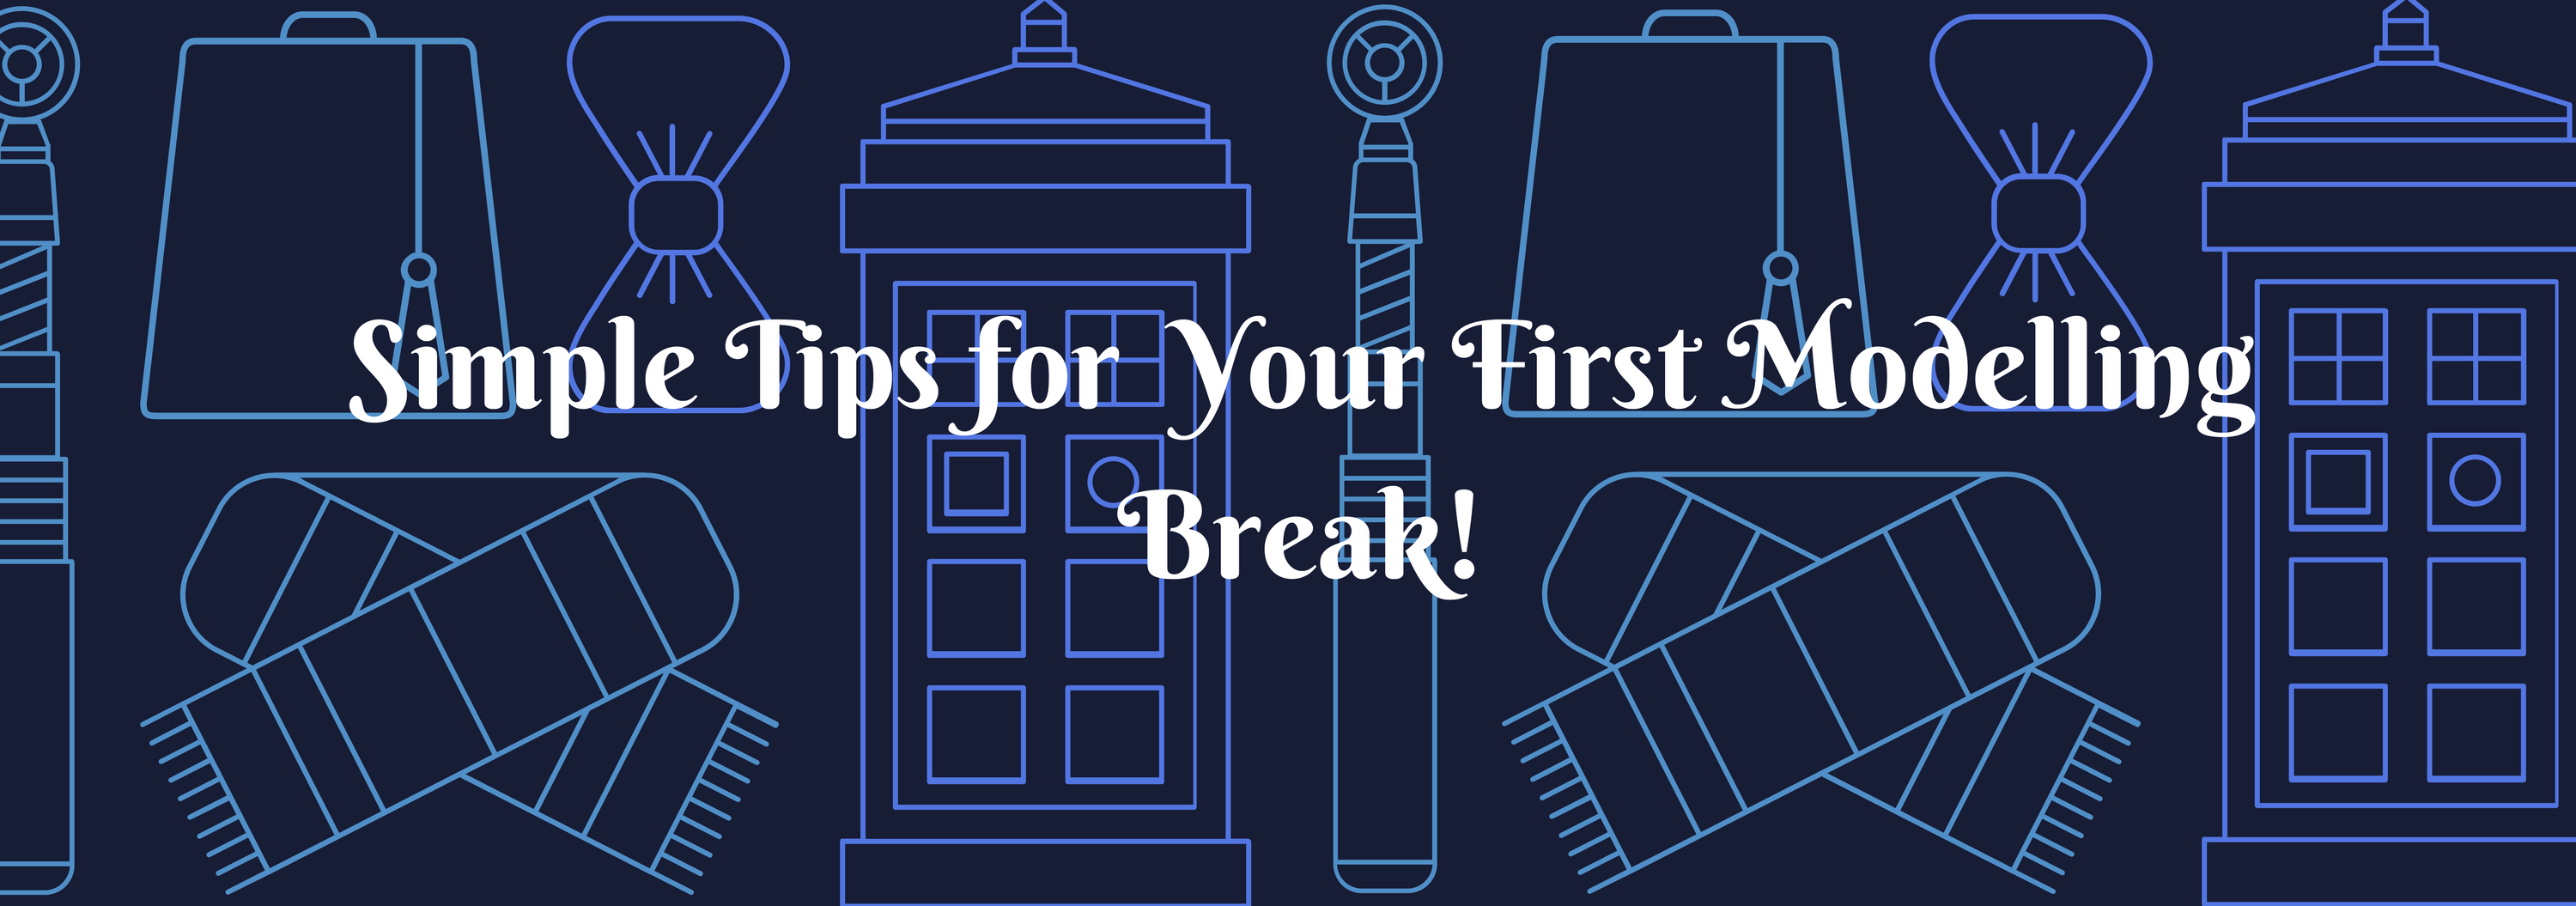 Simple Tips for Your First Modelling Break!